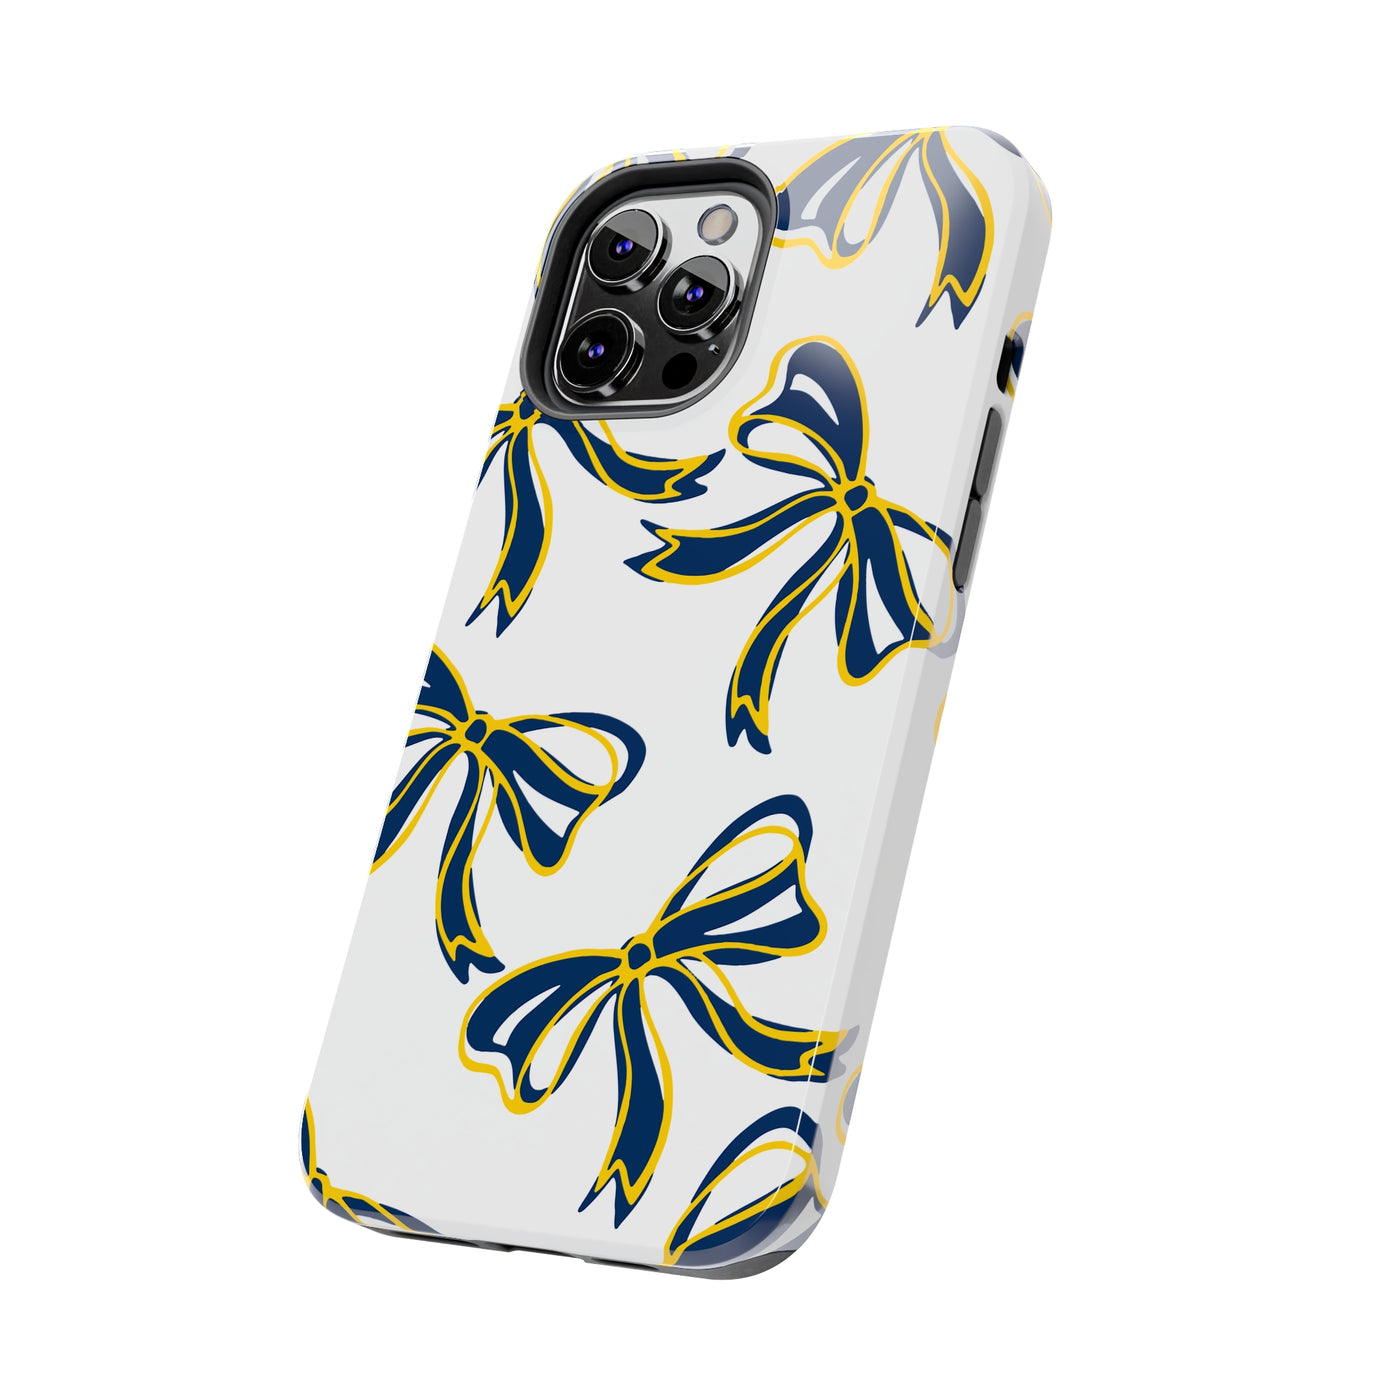 Trendy Bow Phone Case, Bed Party Bow Iphone case, Bow Phone Case, Bow Gifts - Michigan Wolverines - Hail Yeah